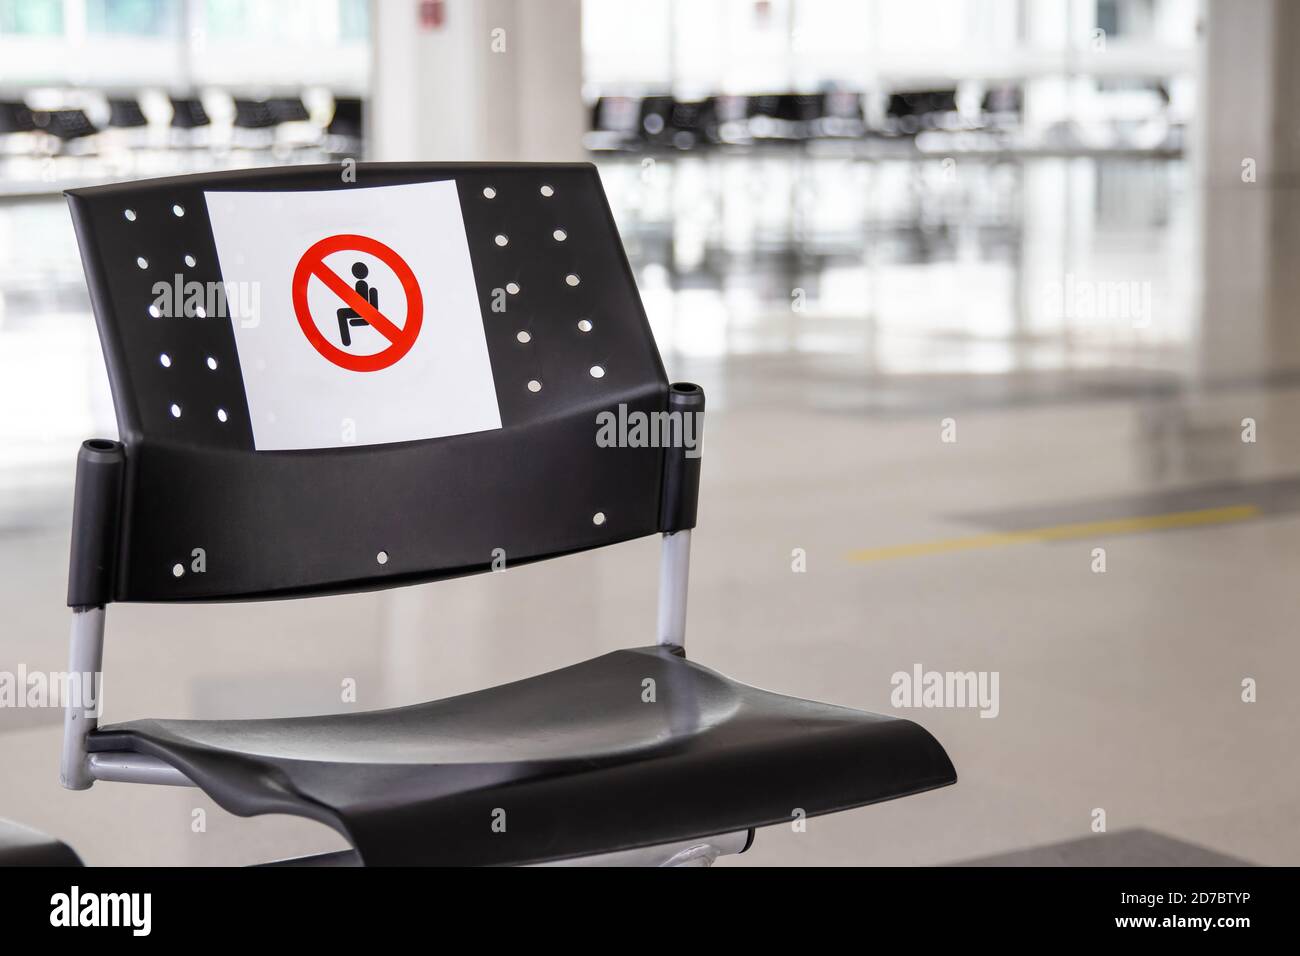 Empty waiting room at an airport during COVID-19 pandemic with social distancing signs on chairs Stock Photo